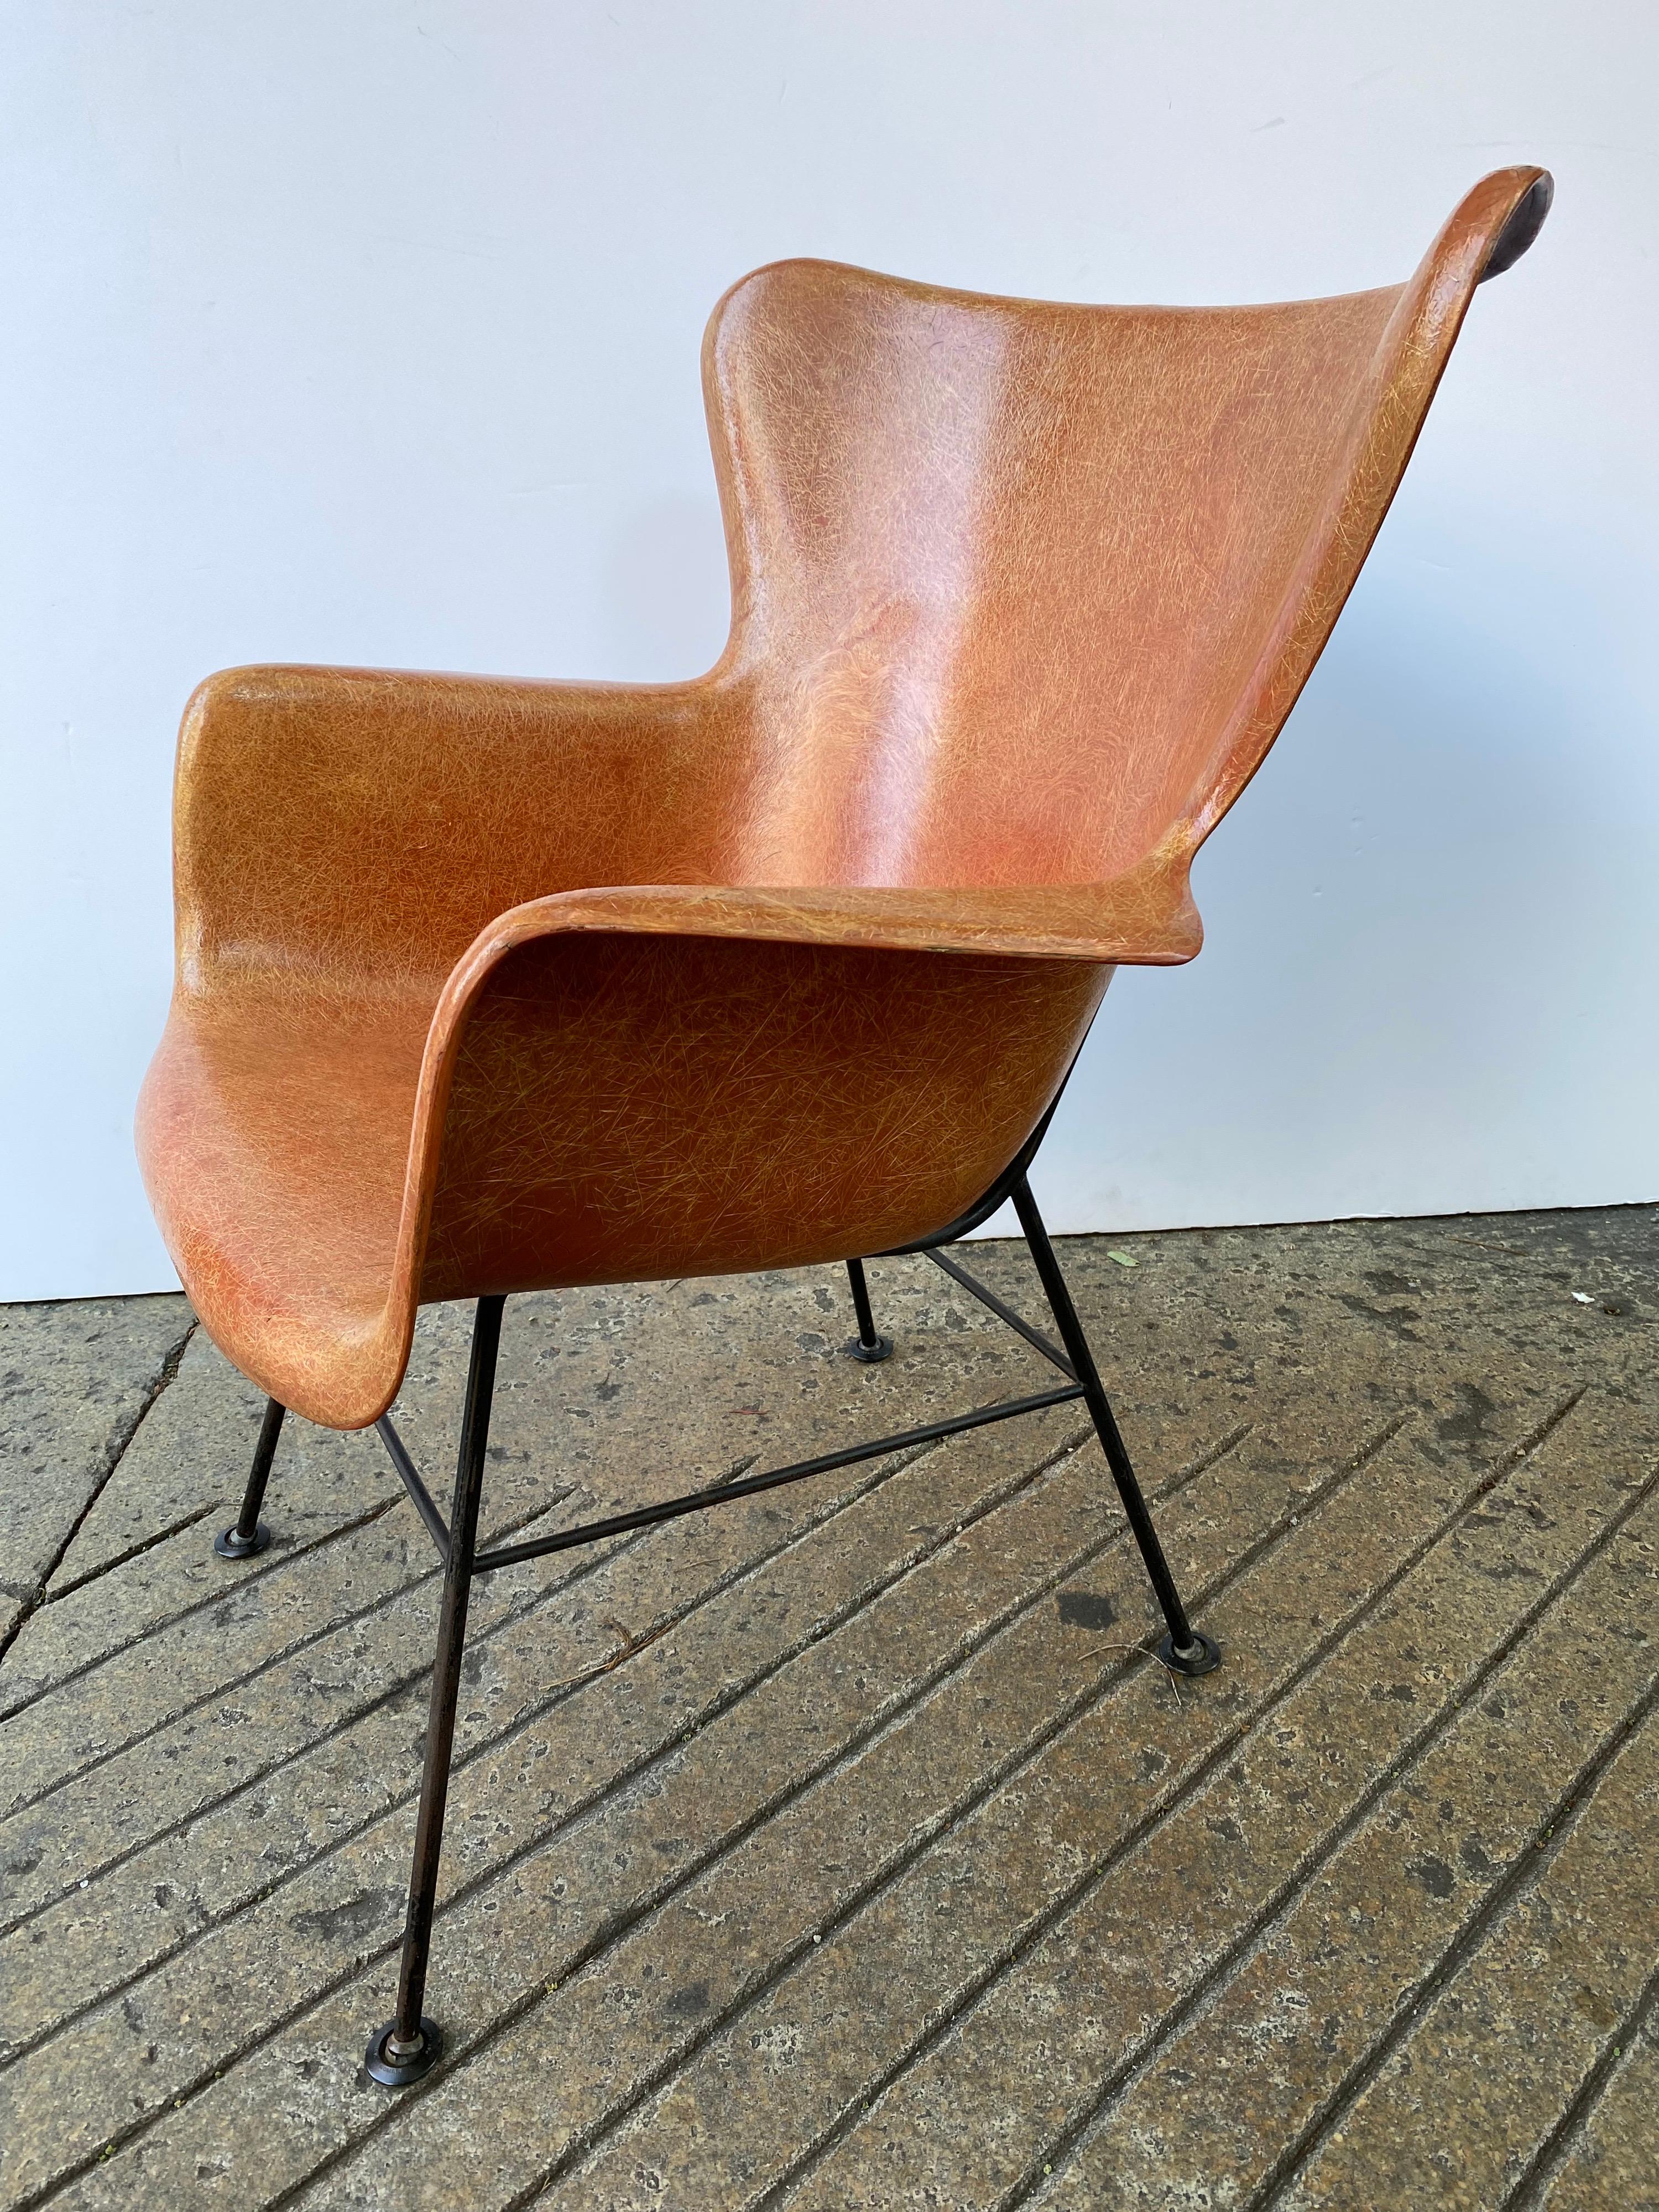 Lawrence Peabody fiberglass arm lounge chair. Nice shade of burnt orange with the more desirable wrought iron black base. Comfortable with a high back. Exposed black bushings visible from behind. Eames Technology used on a larger scale.